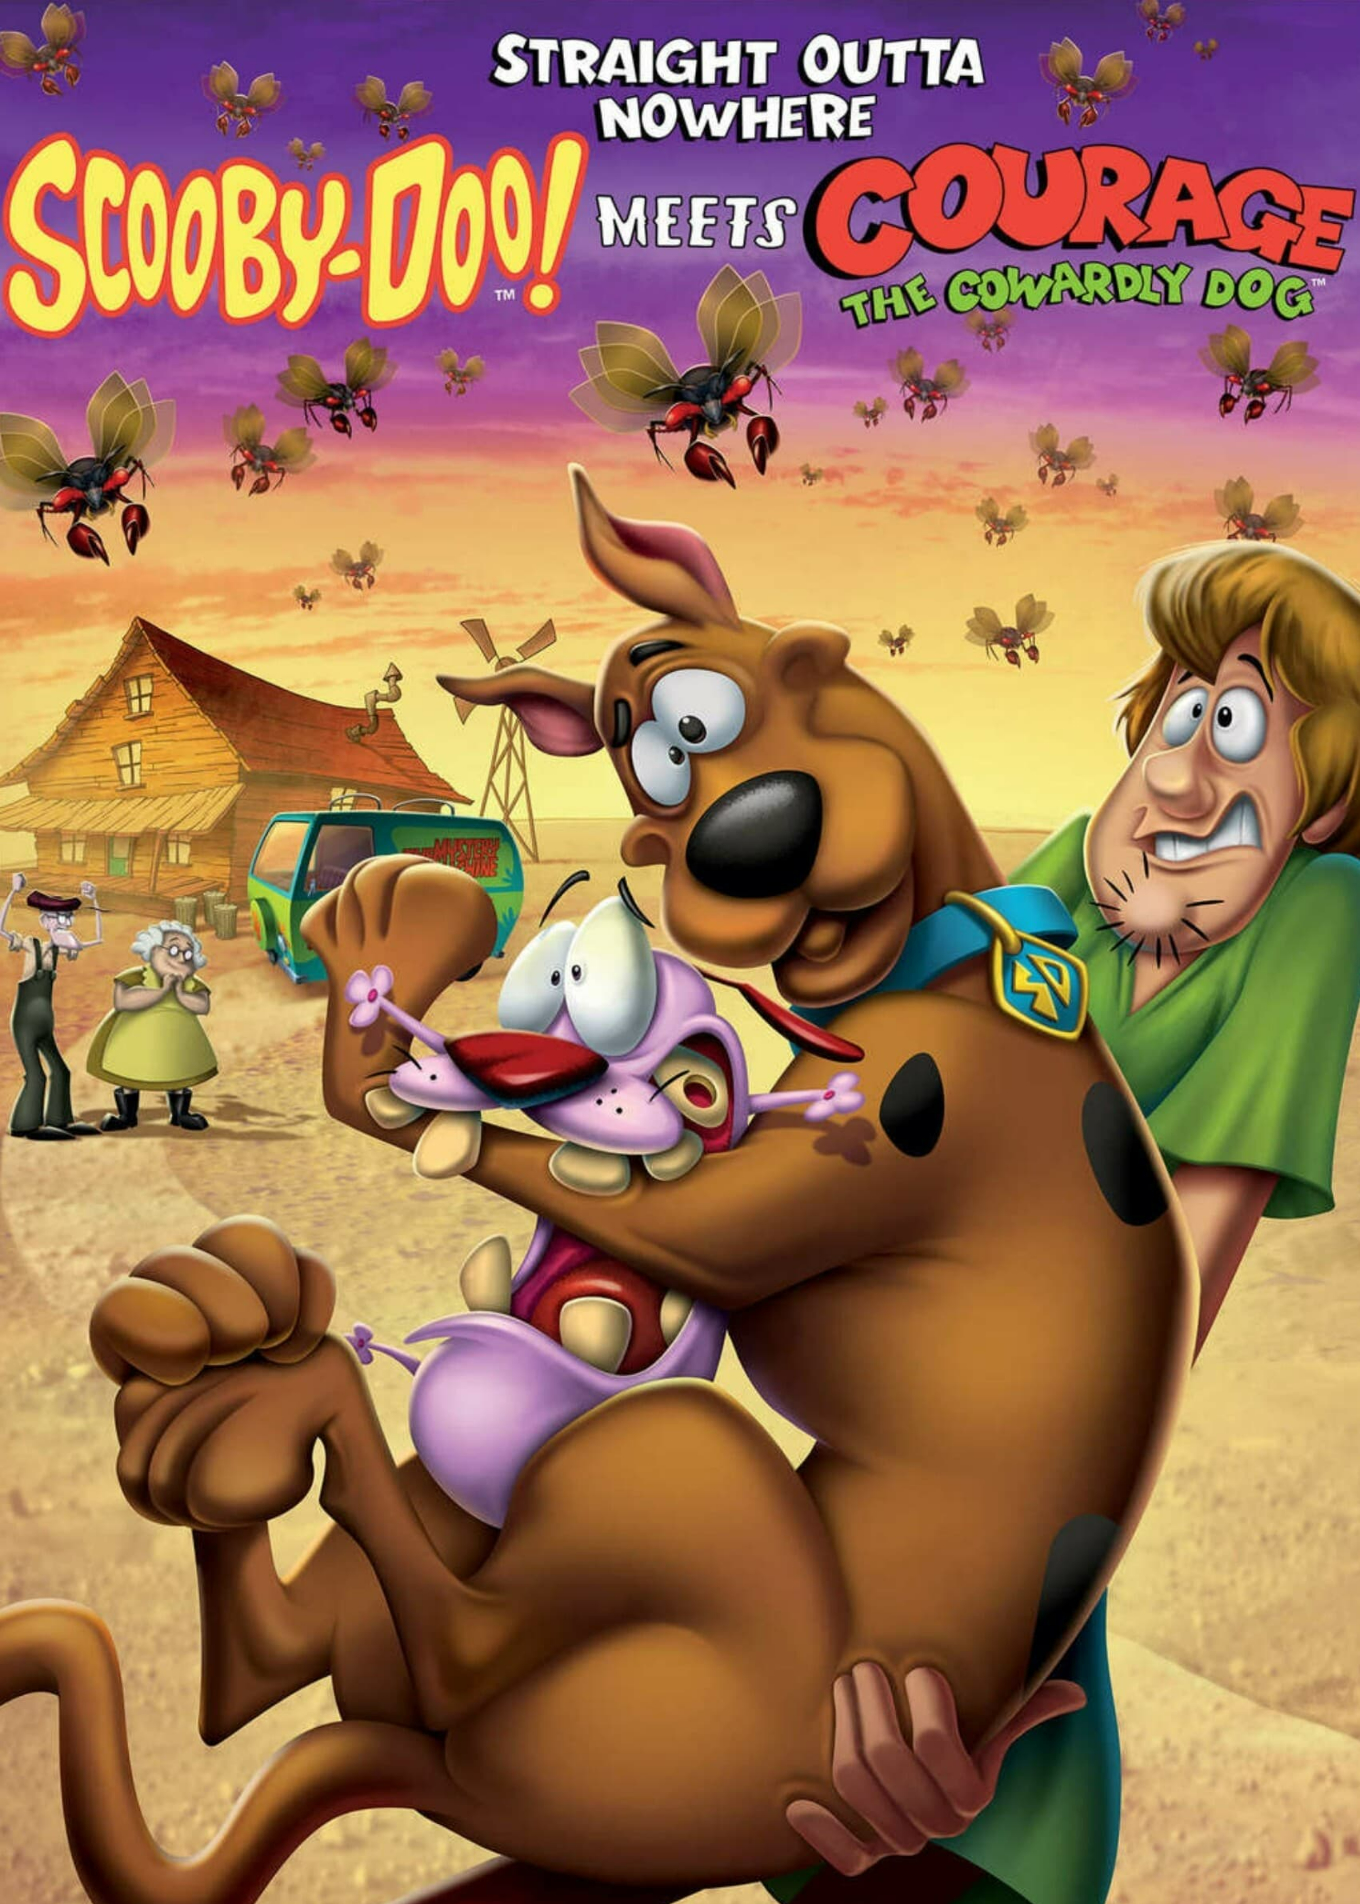 Poster Phim Straight Outta Nowhere: Scooby-Doo! Meets Courage the Cowardly Dog (Straight Outta Nowhere: Scooby-Doo! Meets Courage the Cowardly Dog)